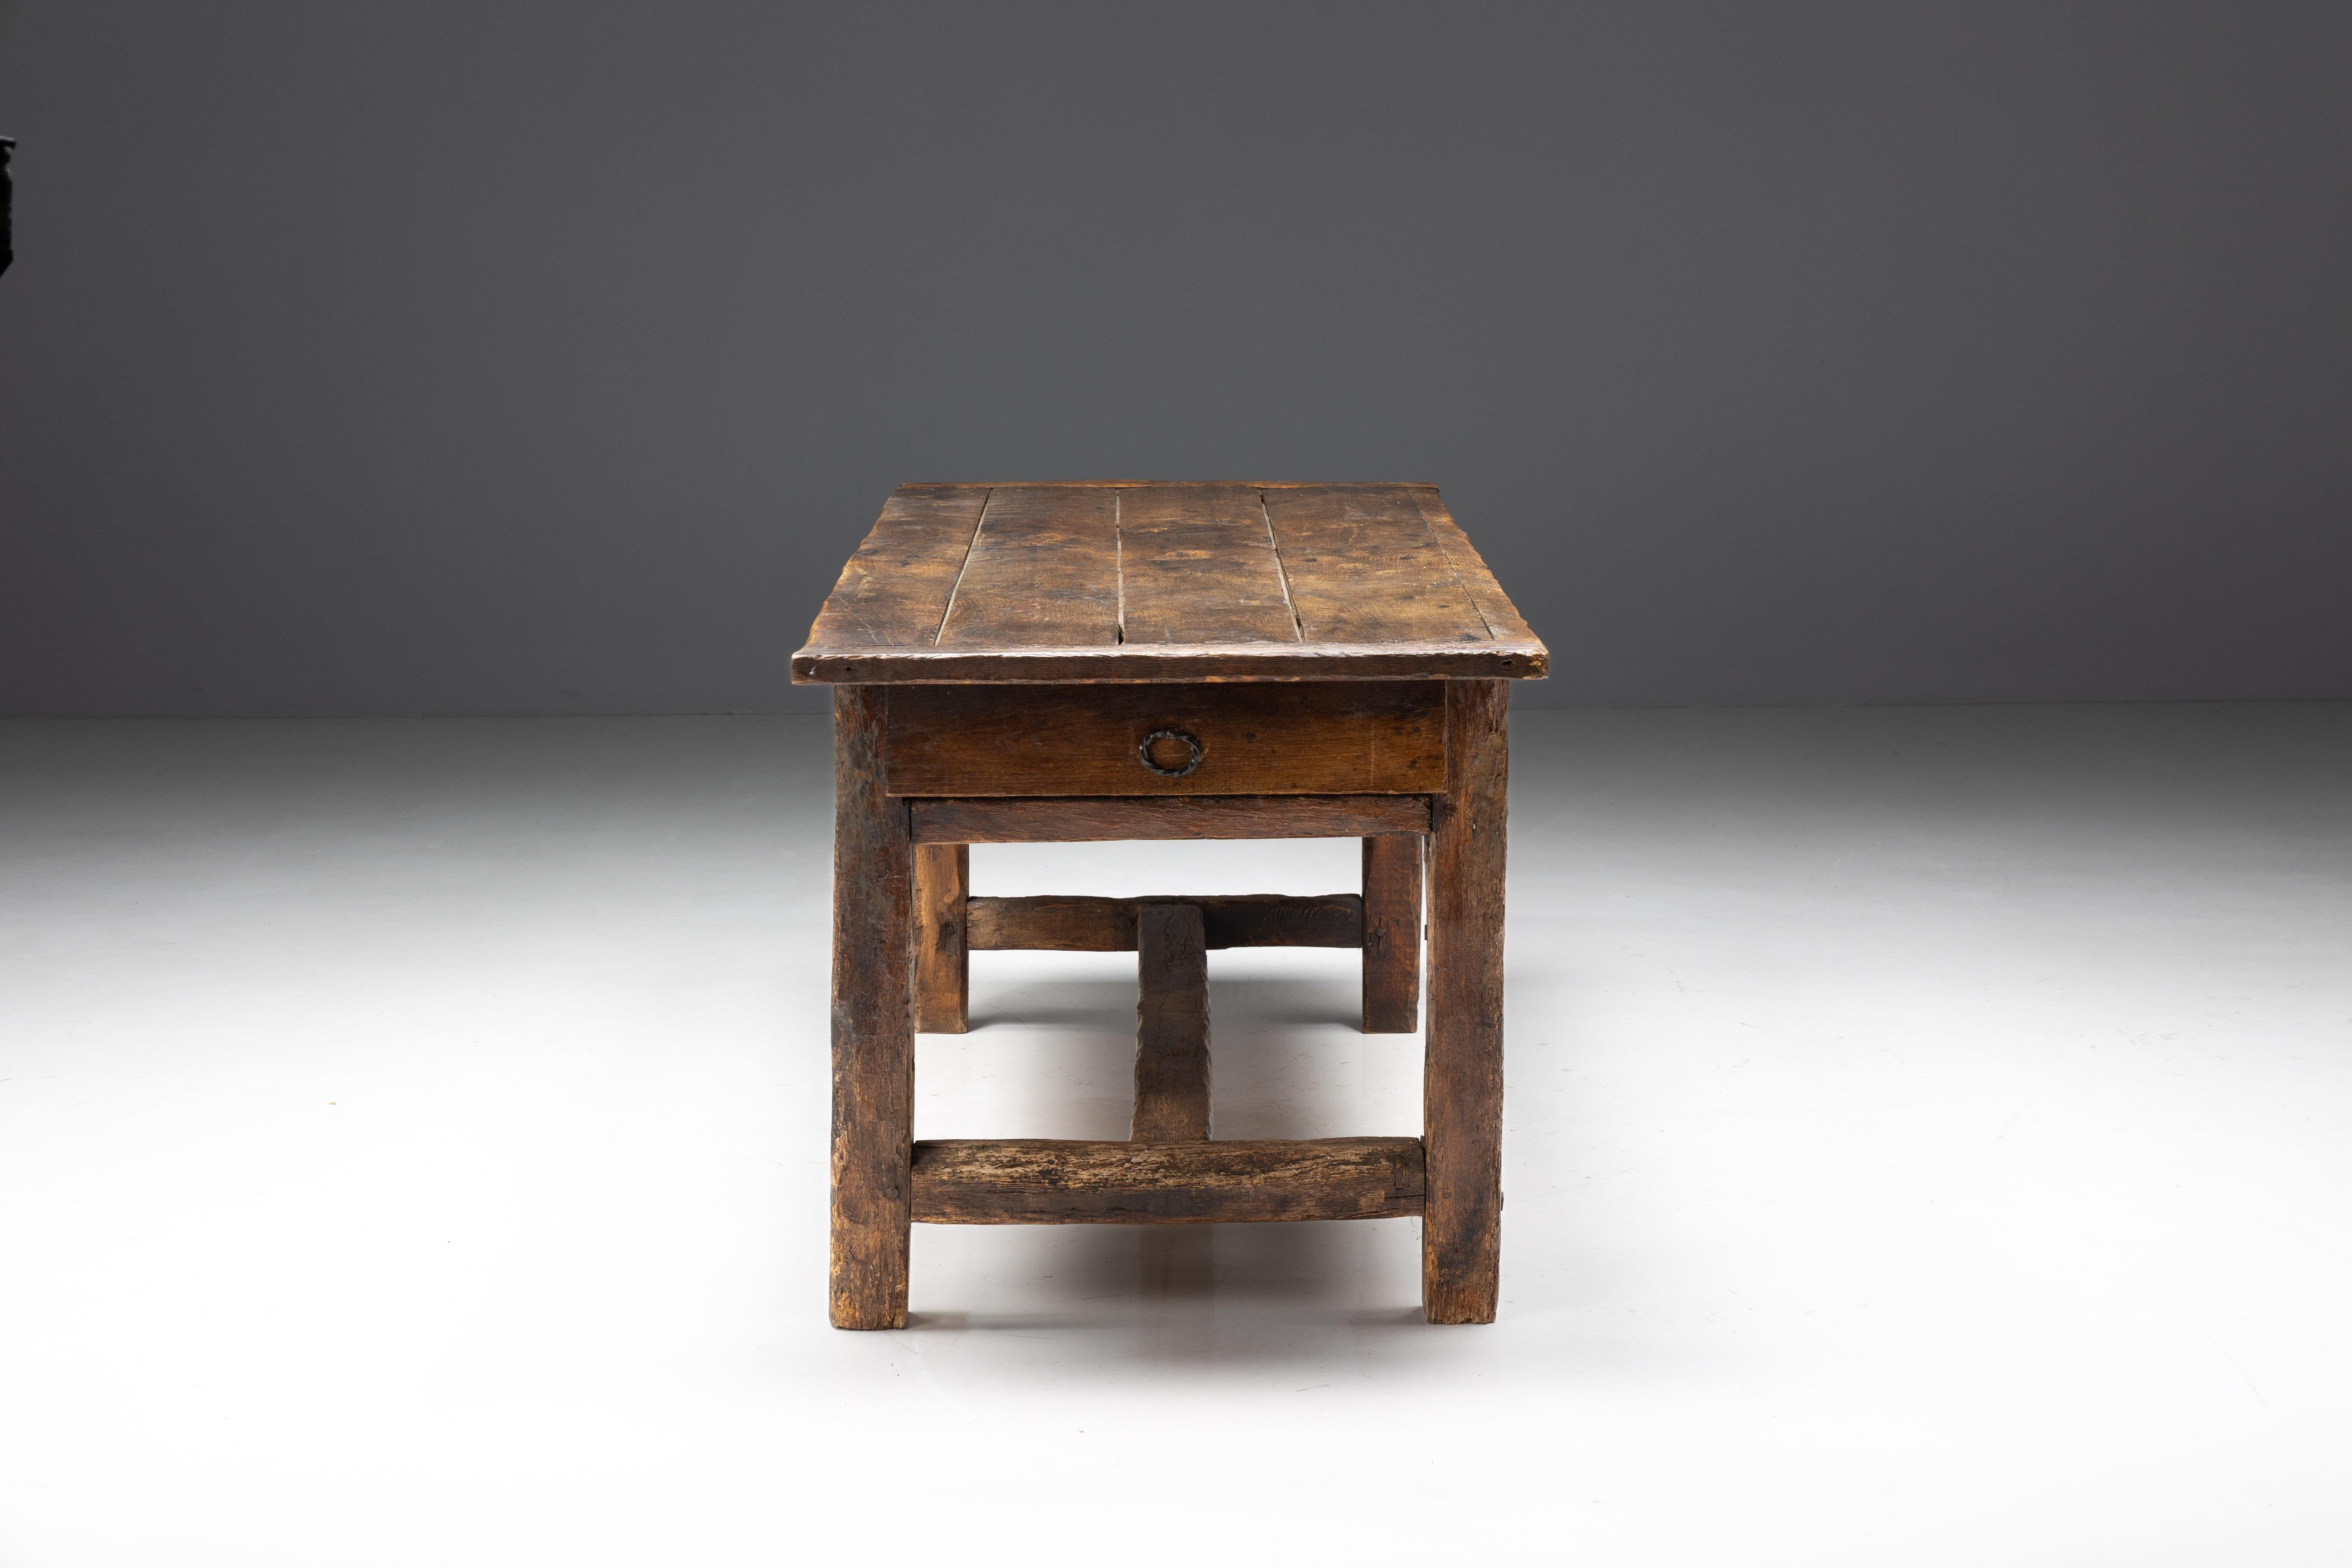 Wood Rustic Folk Art Dining Table, France, 19th Century For Sale